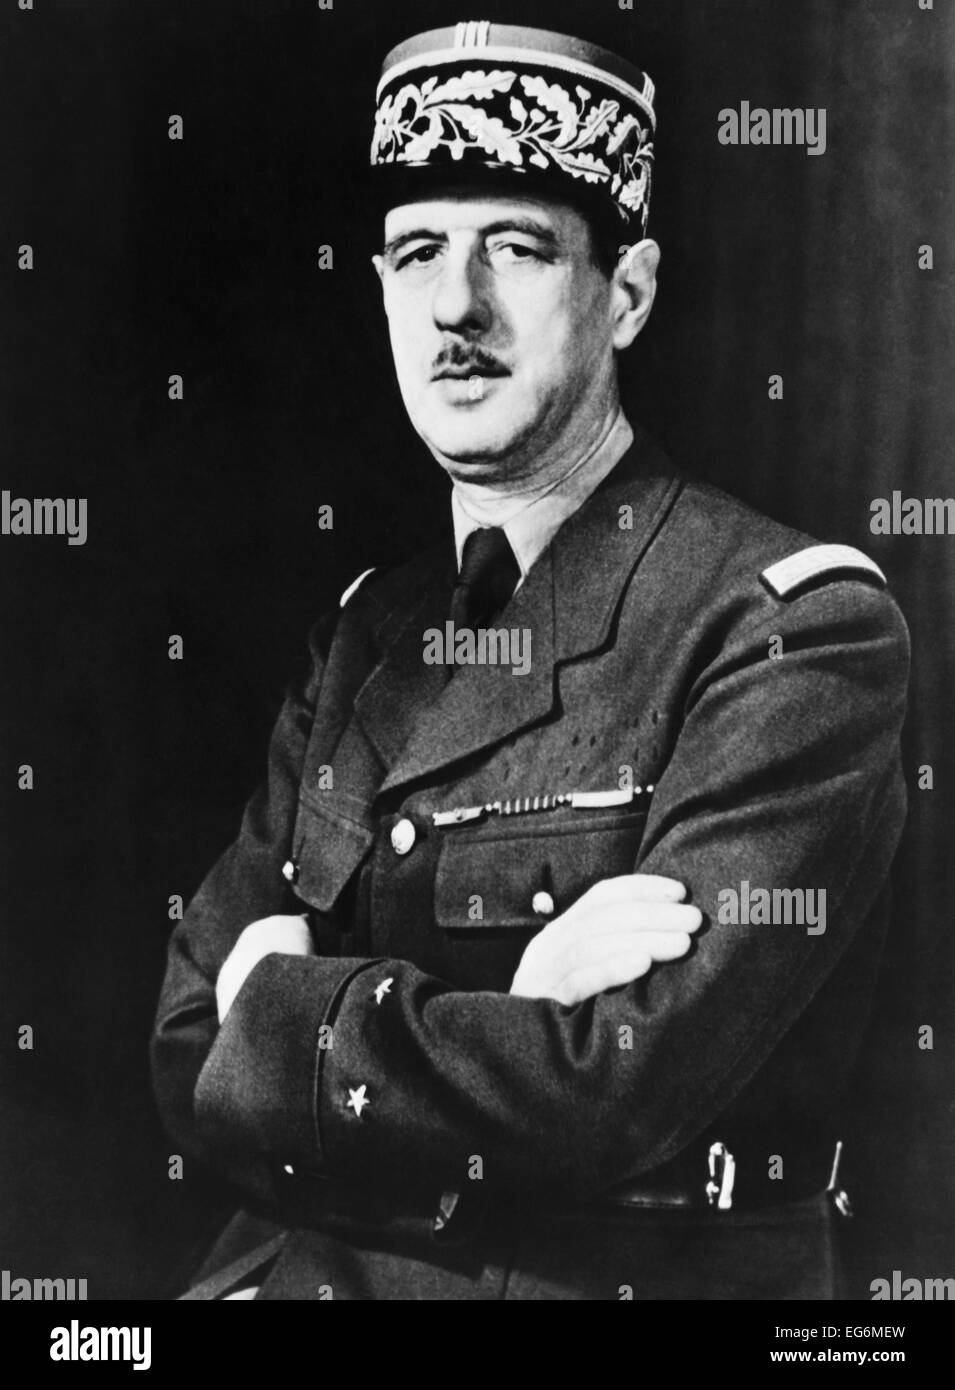 Charles de Gaulle in exile in Britain during World War 2. He resisted the German occupiers, the Vichy collaborators, and fought Stock Photo